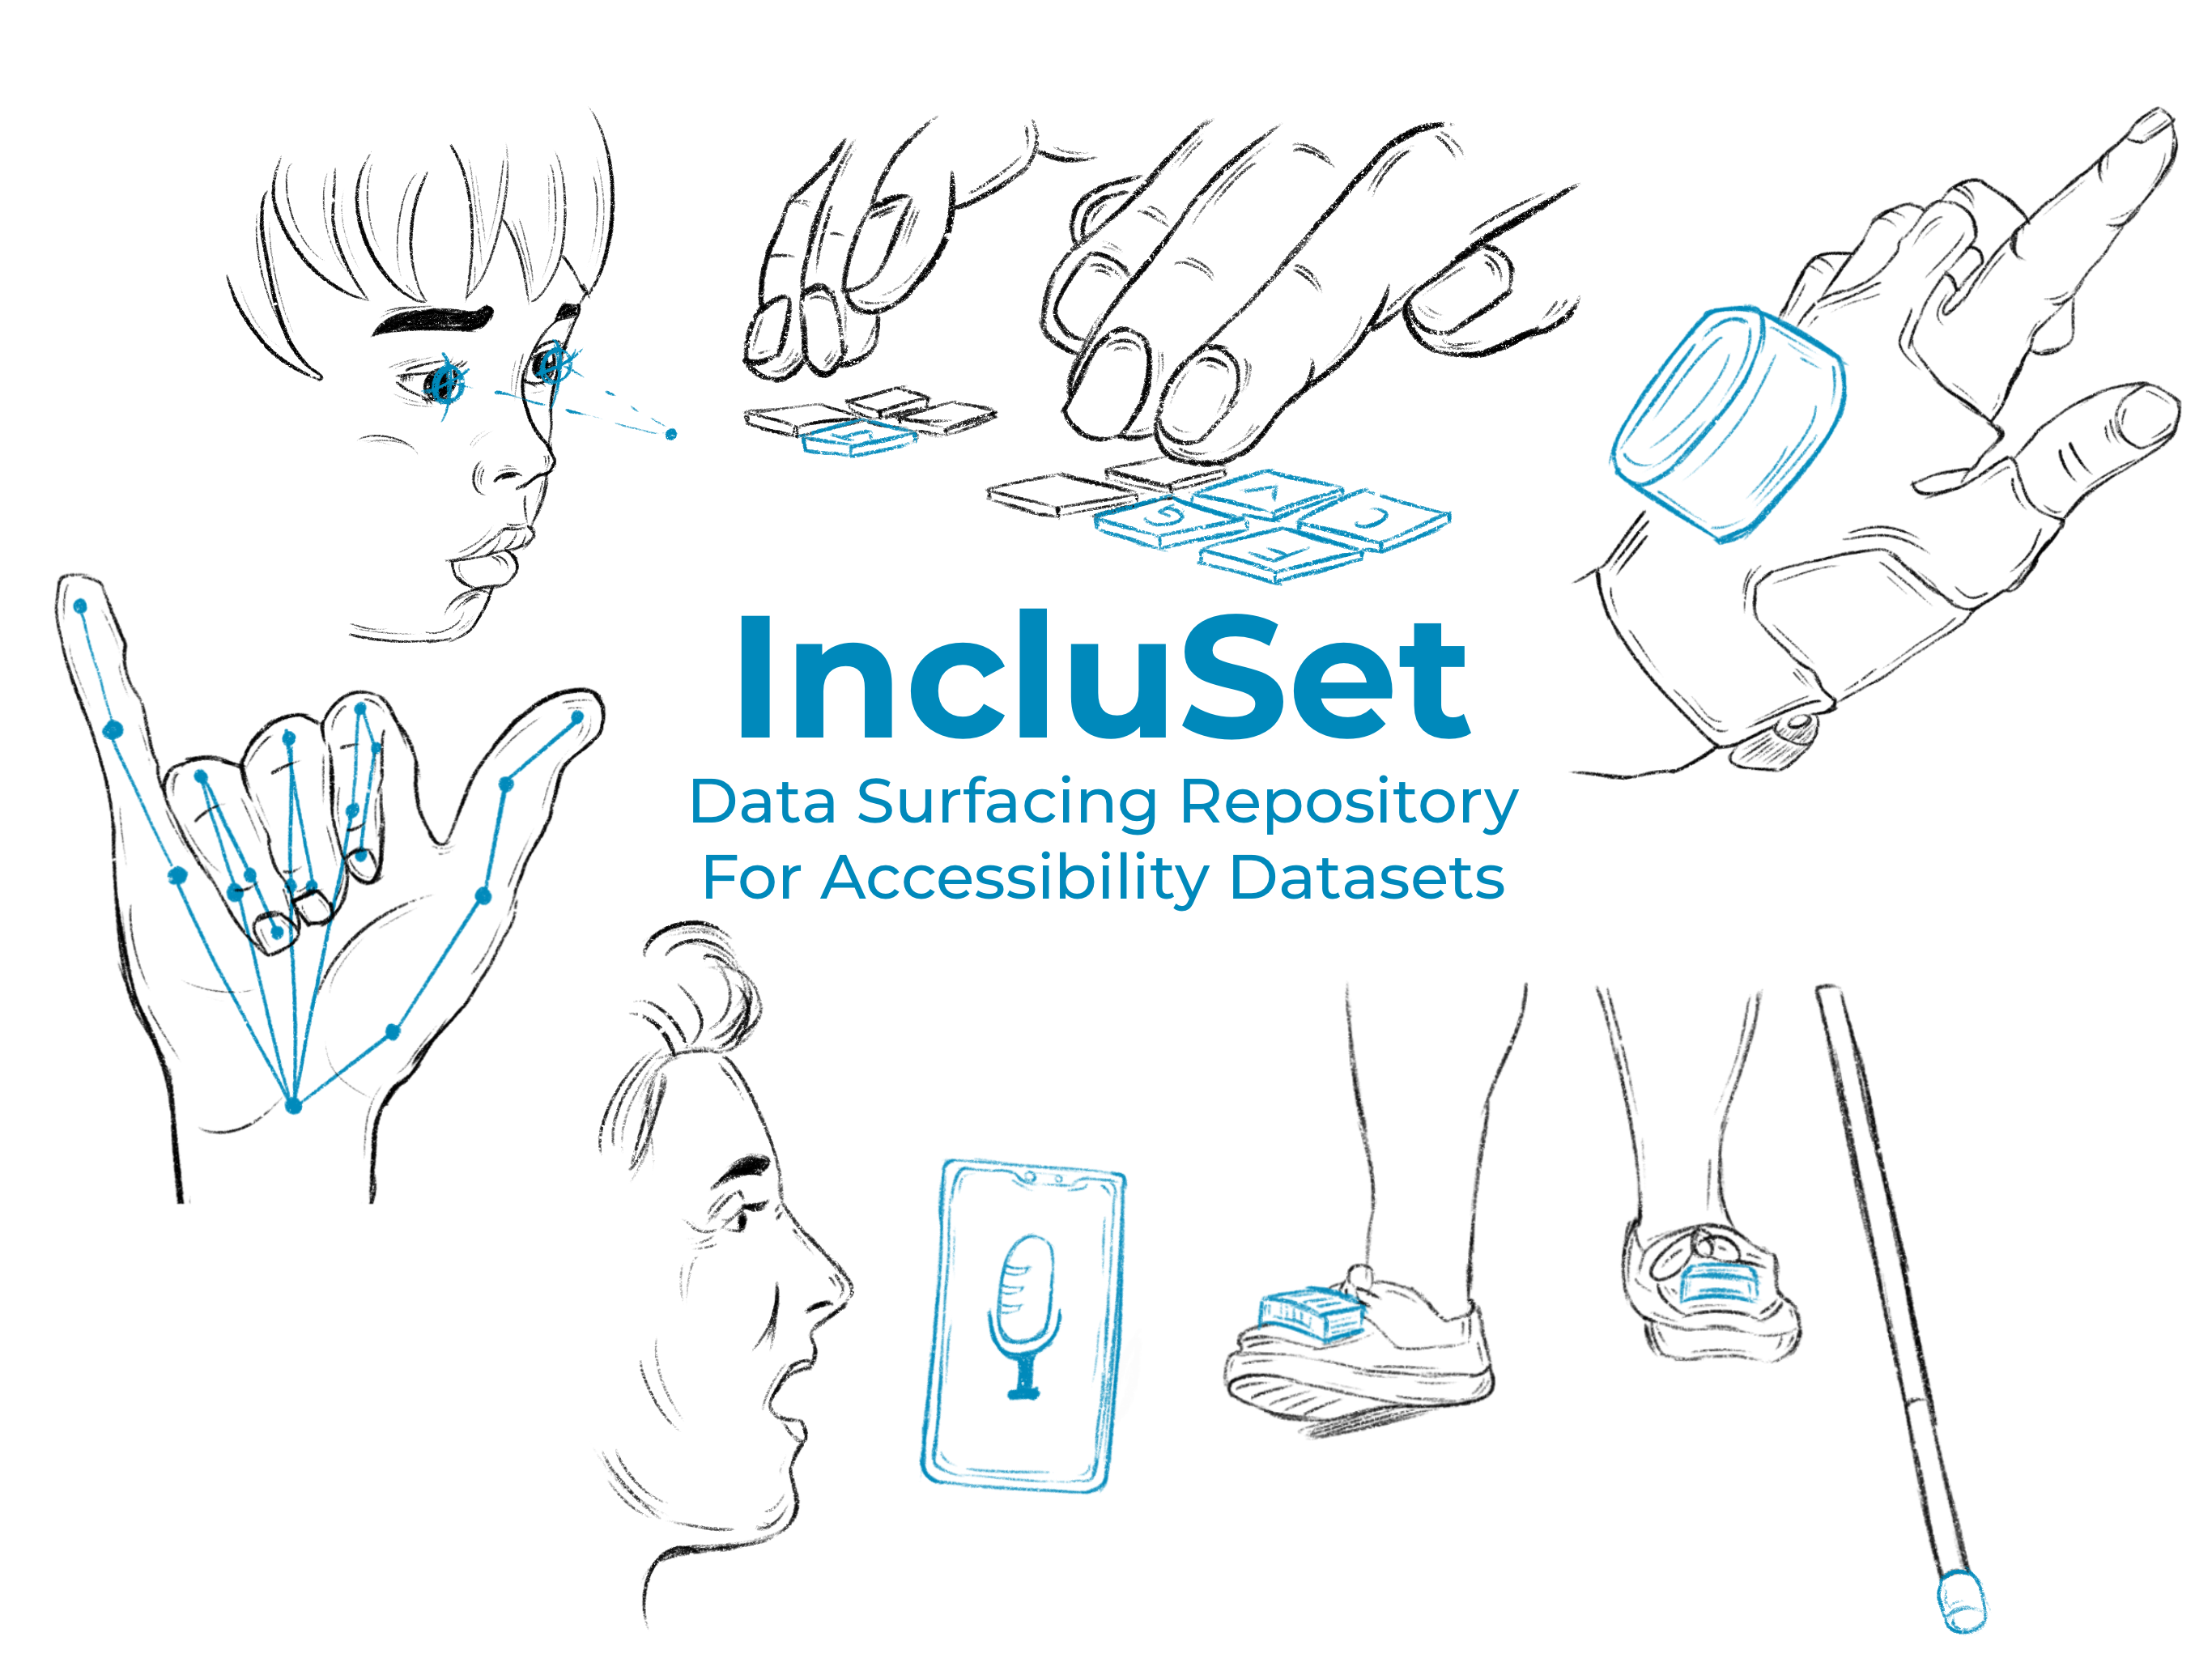 A drawing showing the different datasets that were collected. Following are the depictions - Eye-tracking for children, typing patterns, hand gesture recognition, fingerspelling detector using images of hands, dysartic speech recognition where an adult is speaking to a mobile app, and sensors on feet of Blind people for tracing their path.